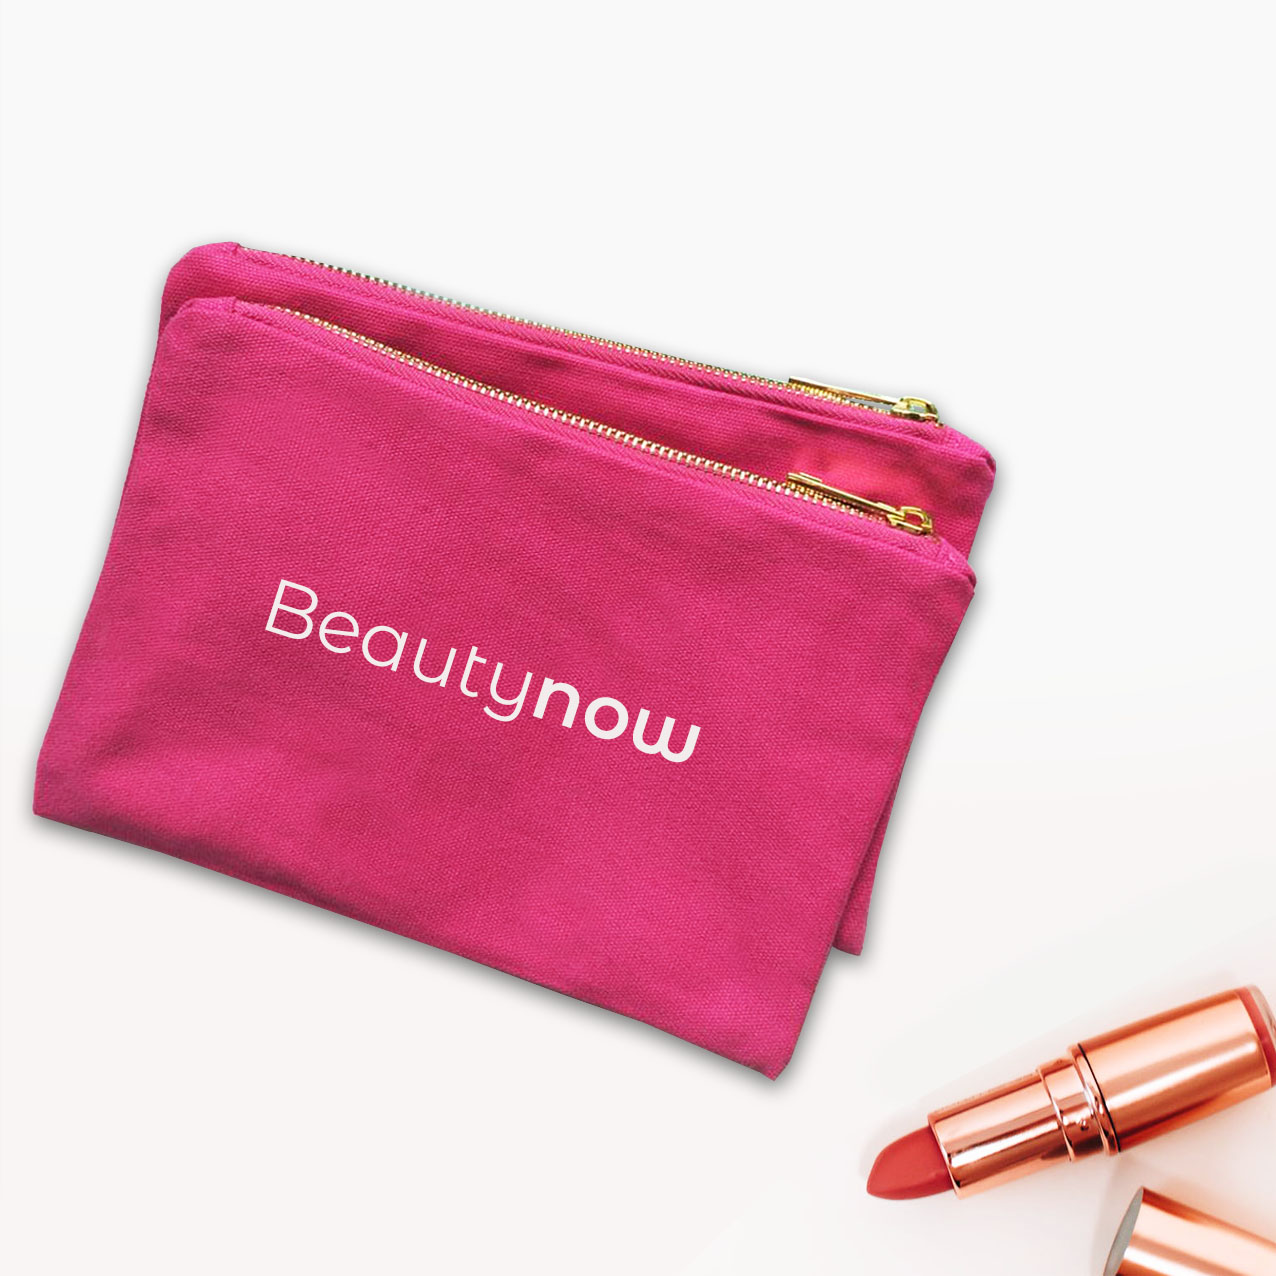 Logo Printed Pink Canvas Cosmetic Bag With YKK Zipper Closure